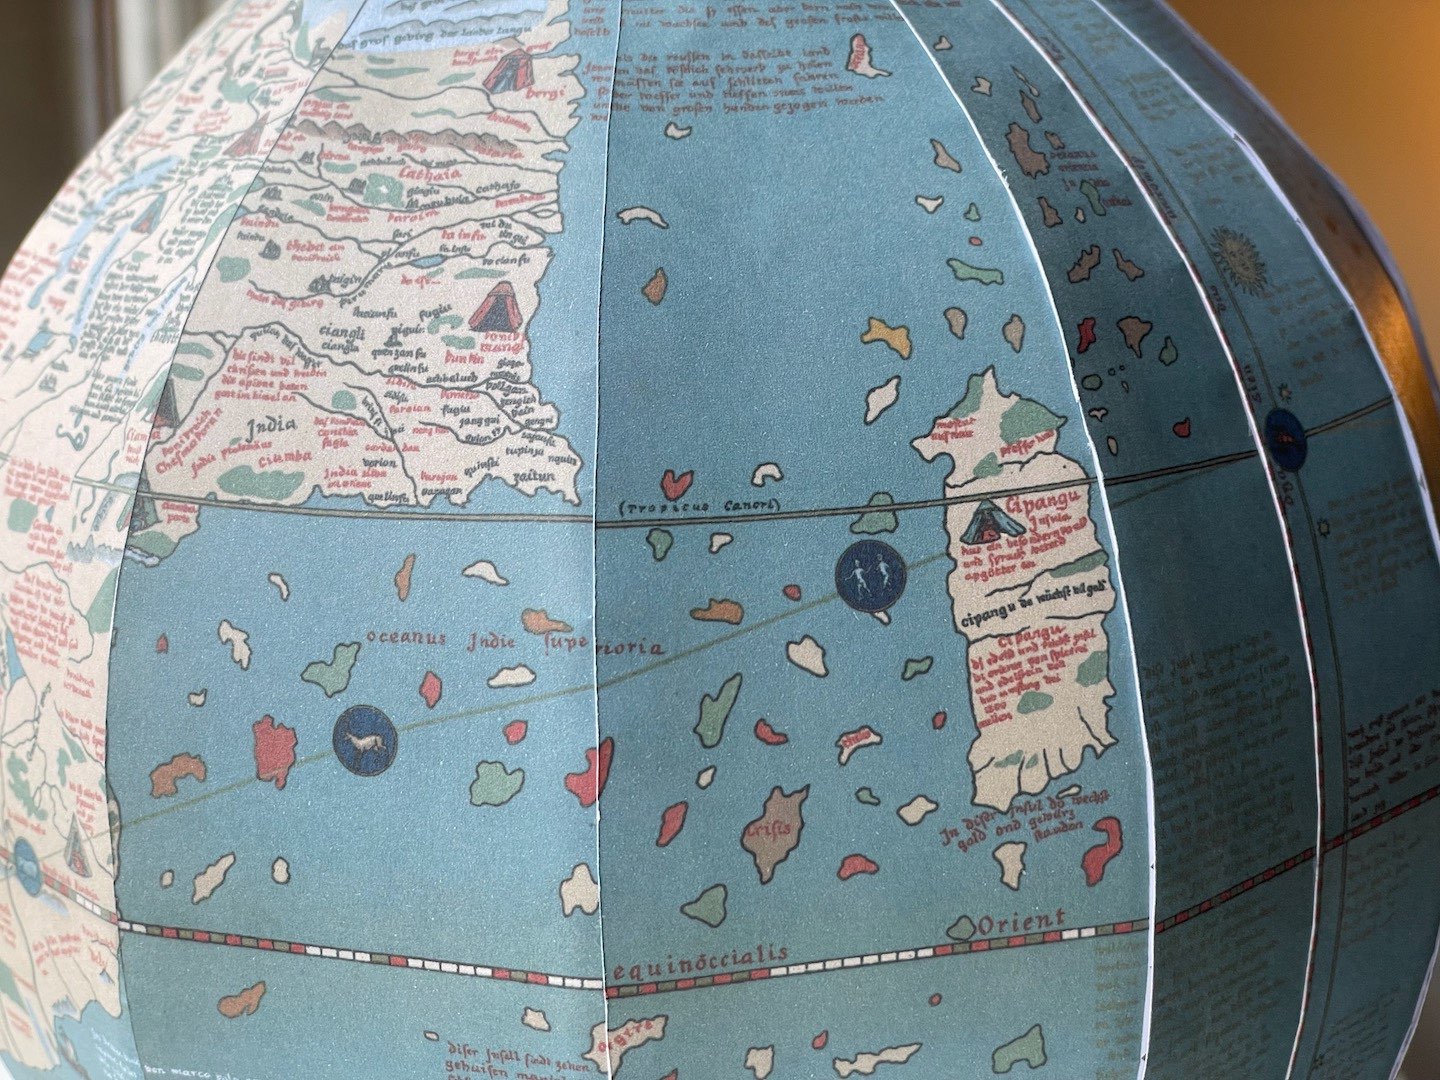 Photograph of the paper globe, showing India and Japan.